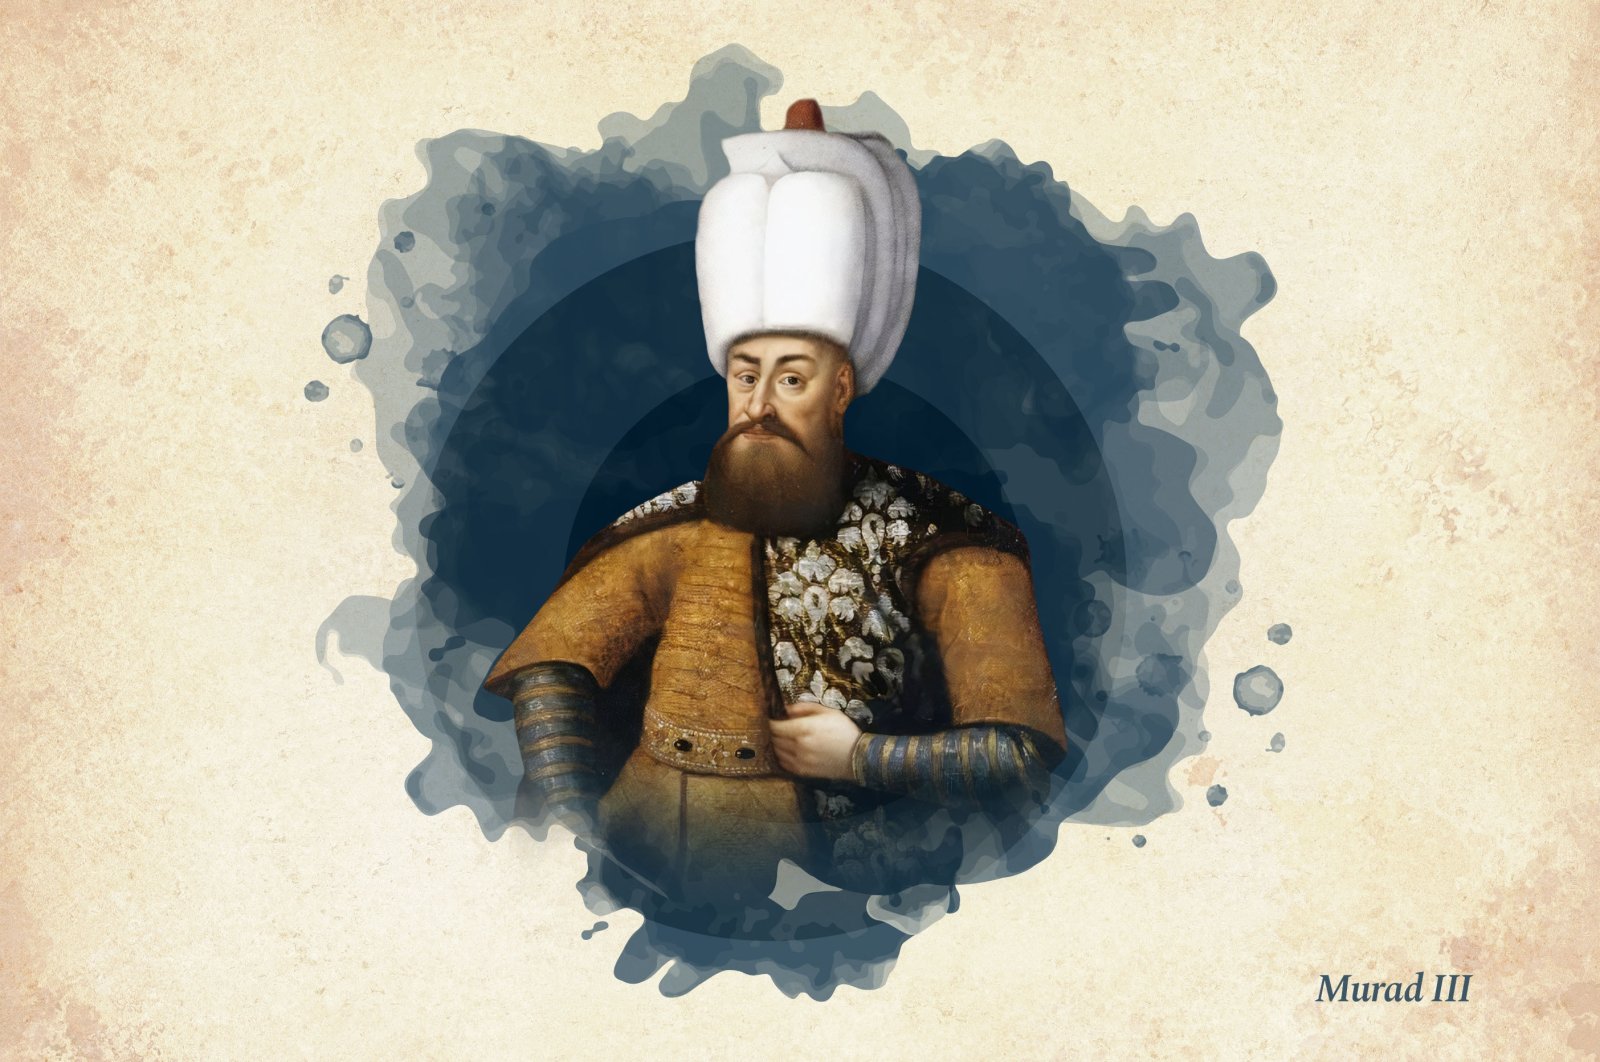 This widely used illustration shows Sultan Murad III, the 12th ruler of the Ottoman Empire. (Wikimedia / edited by Büşra Öztürk)